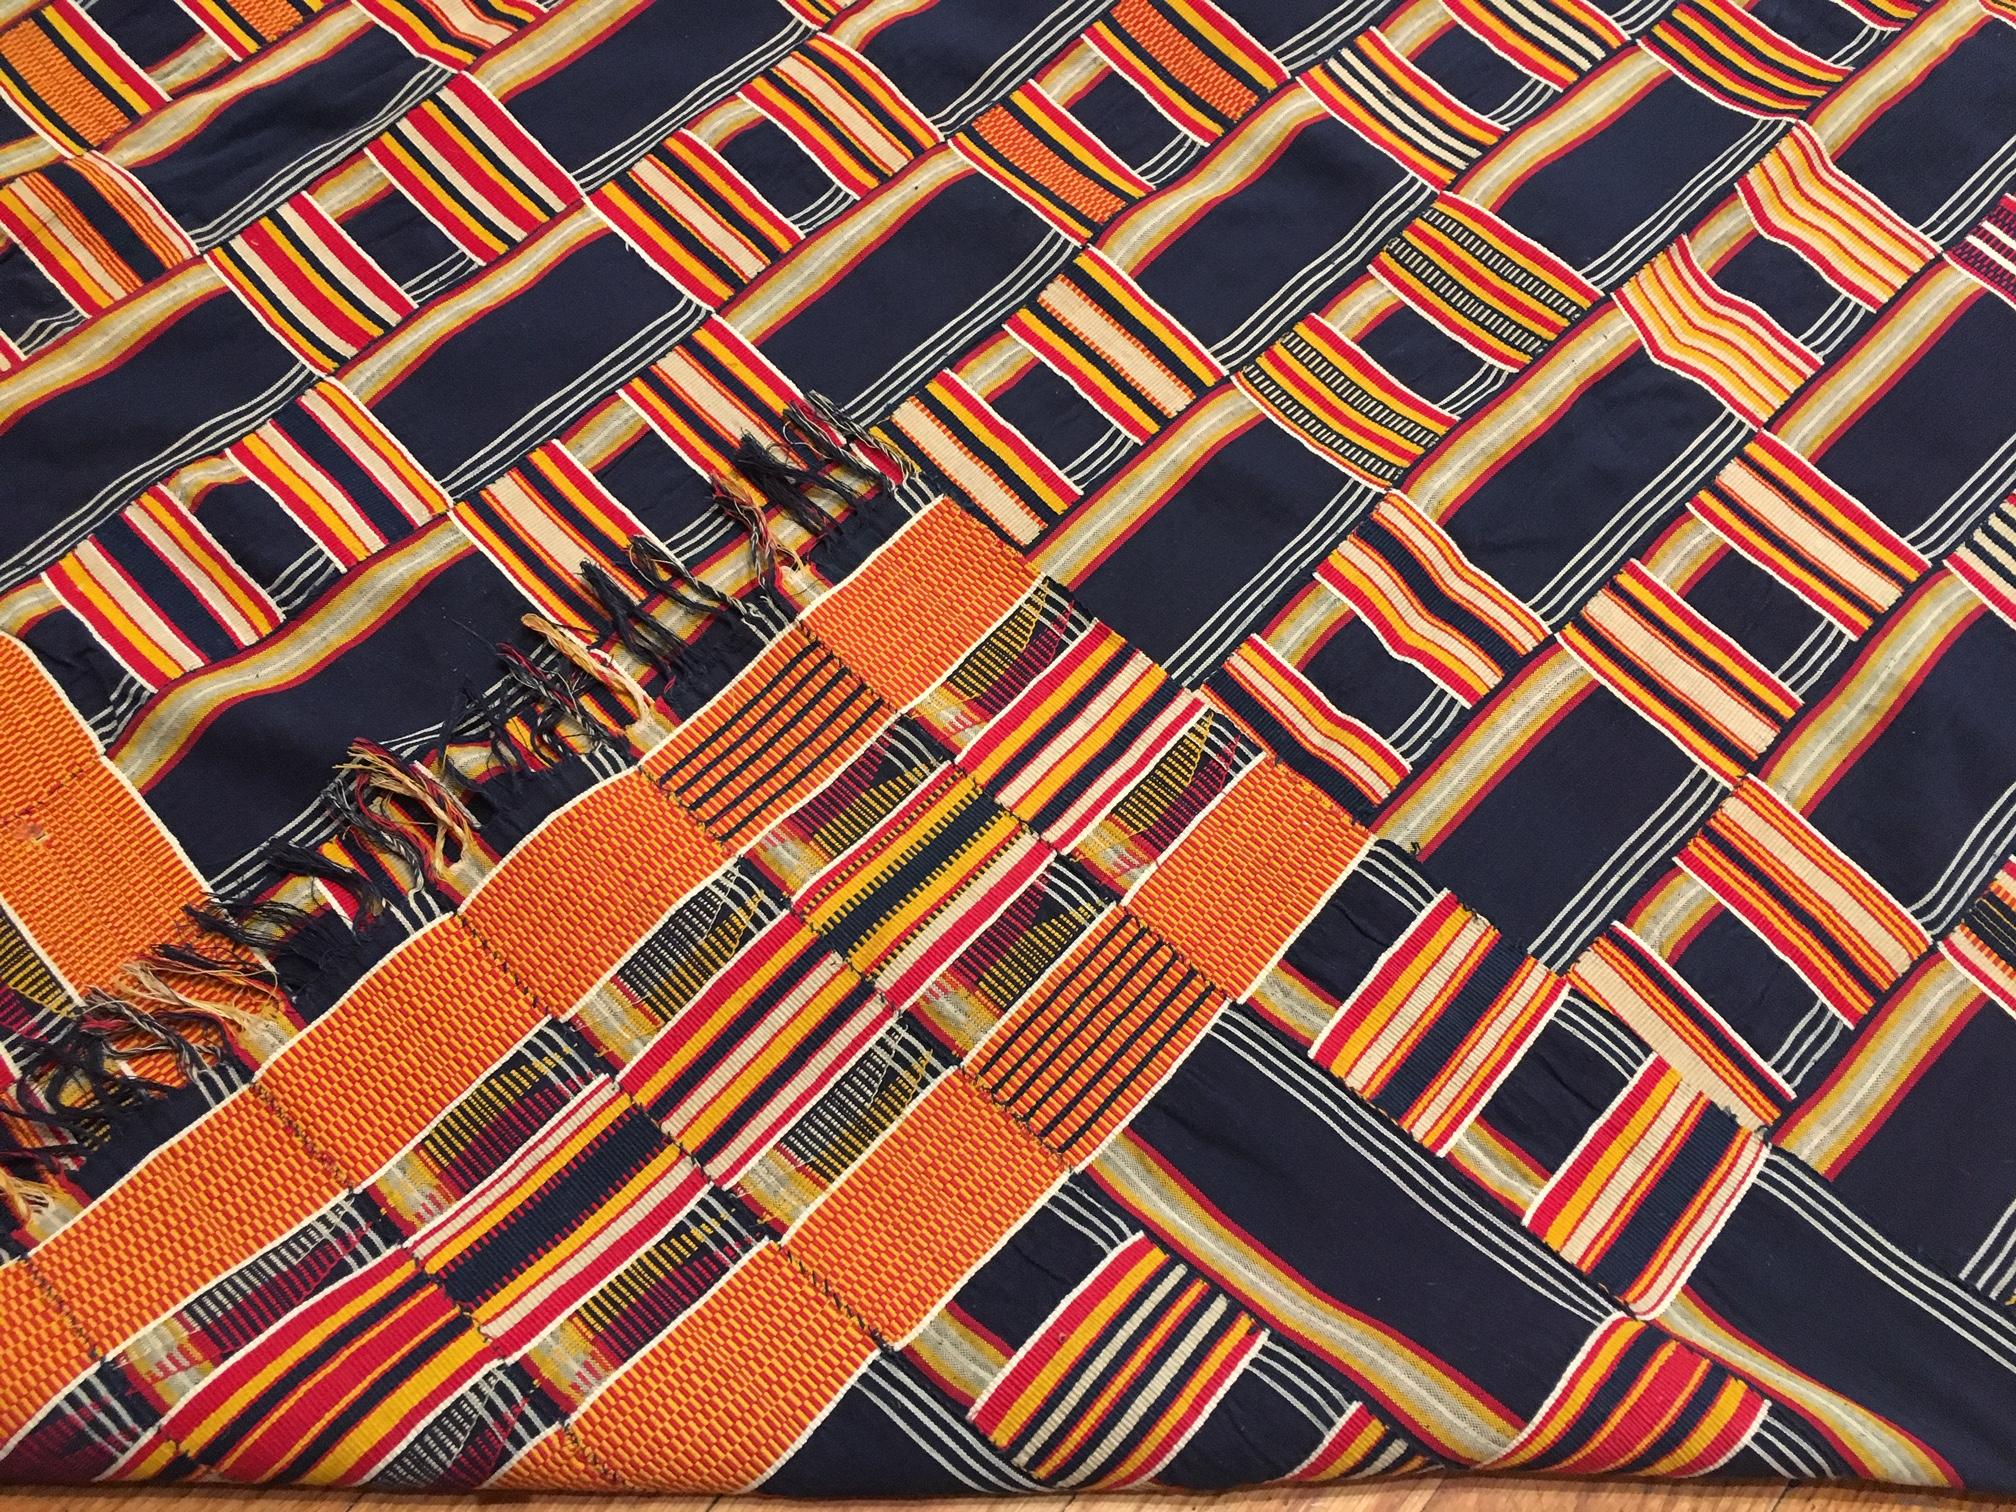 Ghanaian Antique African Ewe Kente Textile. Size: 5 ft 9 in x 8 ft 7 in (1.75 m x 2.62 m)